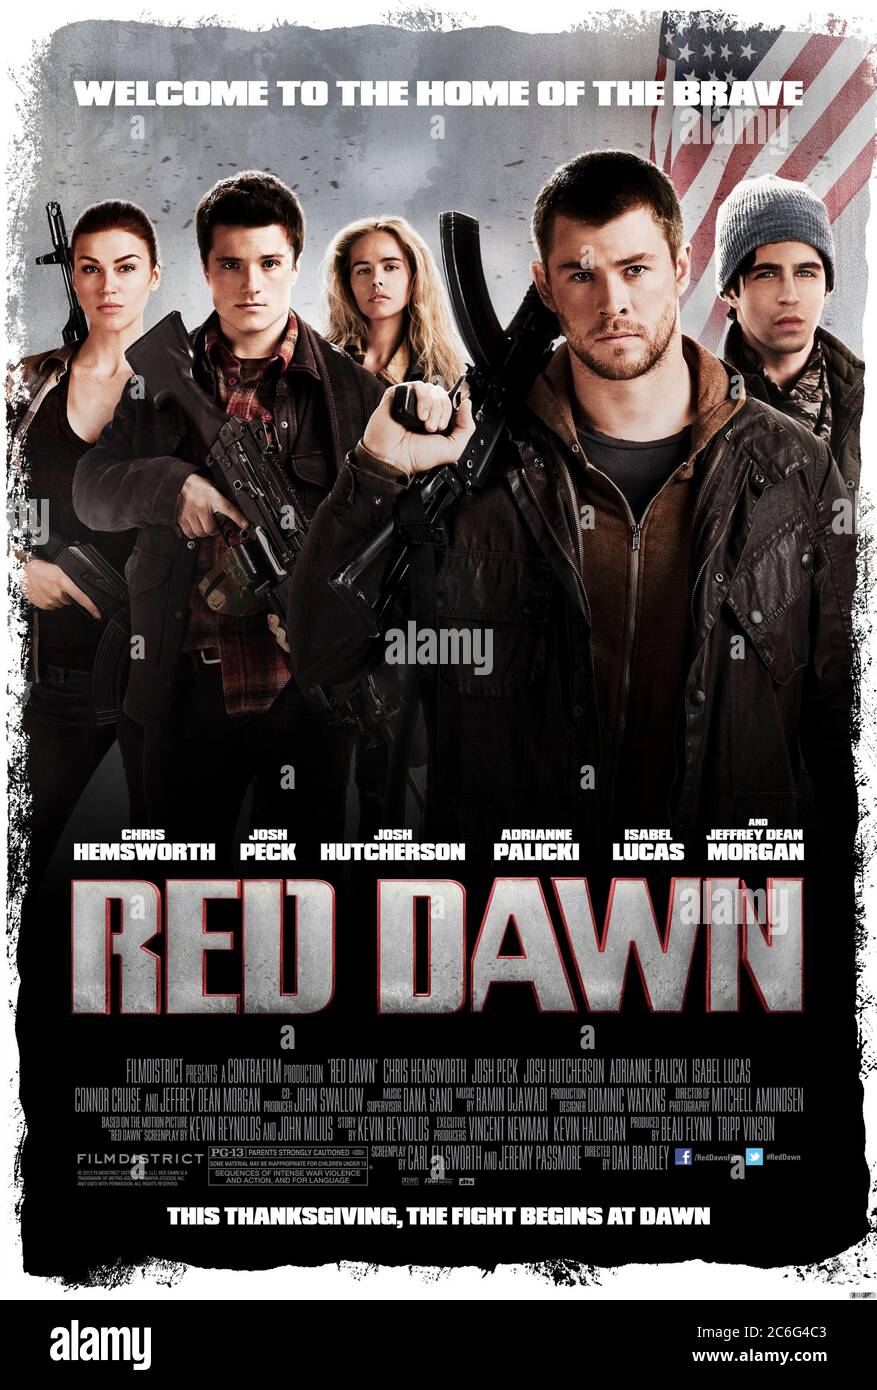 Red Dawn 12 Directed By Dan Bradley And Starring Chris Hemsworth Isabel Lucas Josh Hutcherson And Toni Walsh Remake Of The 1984 Film Of The Same Name Except This Time The North